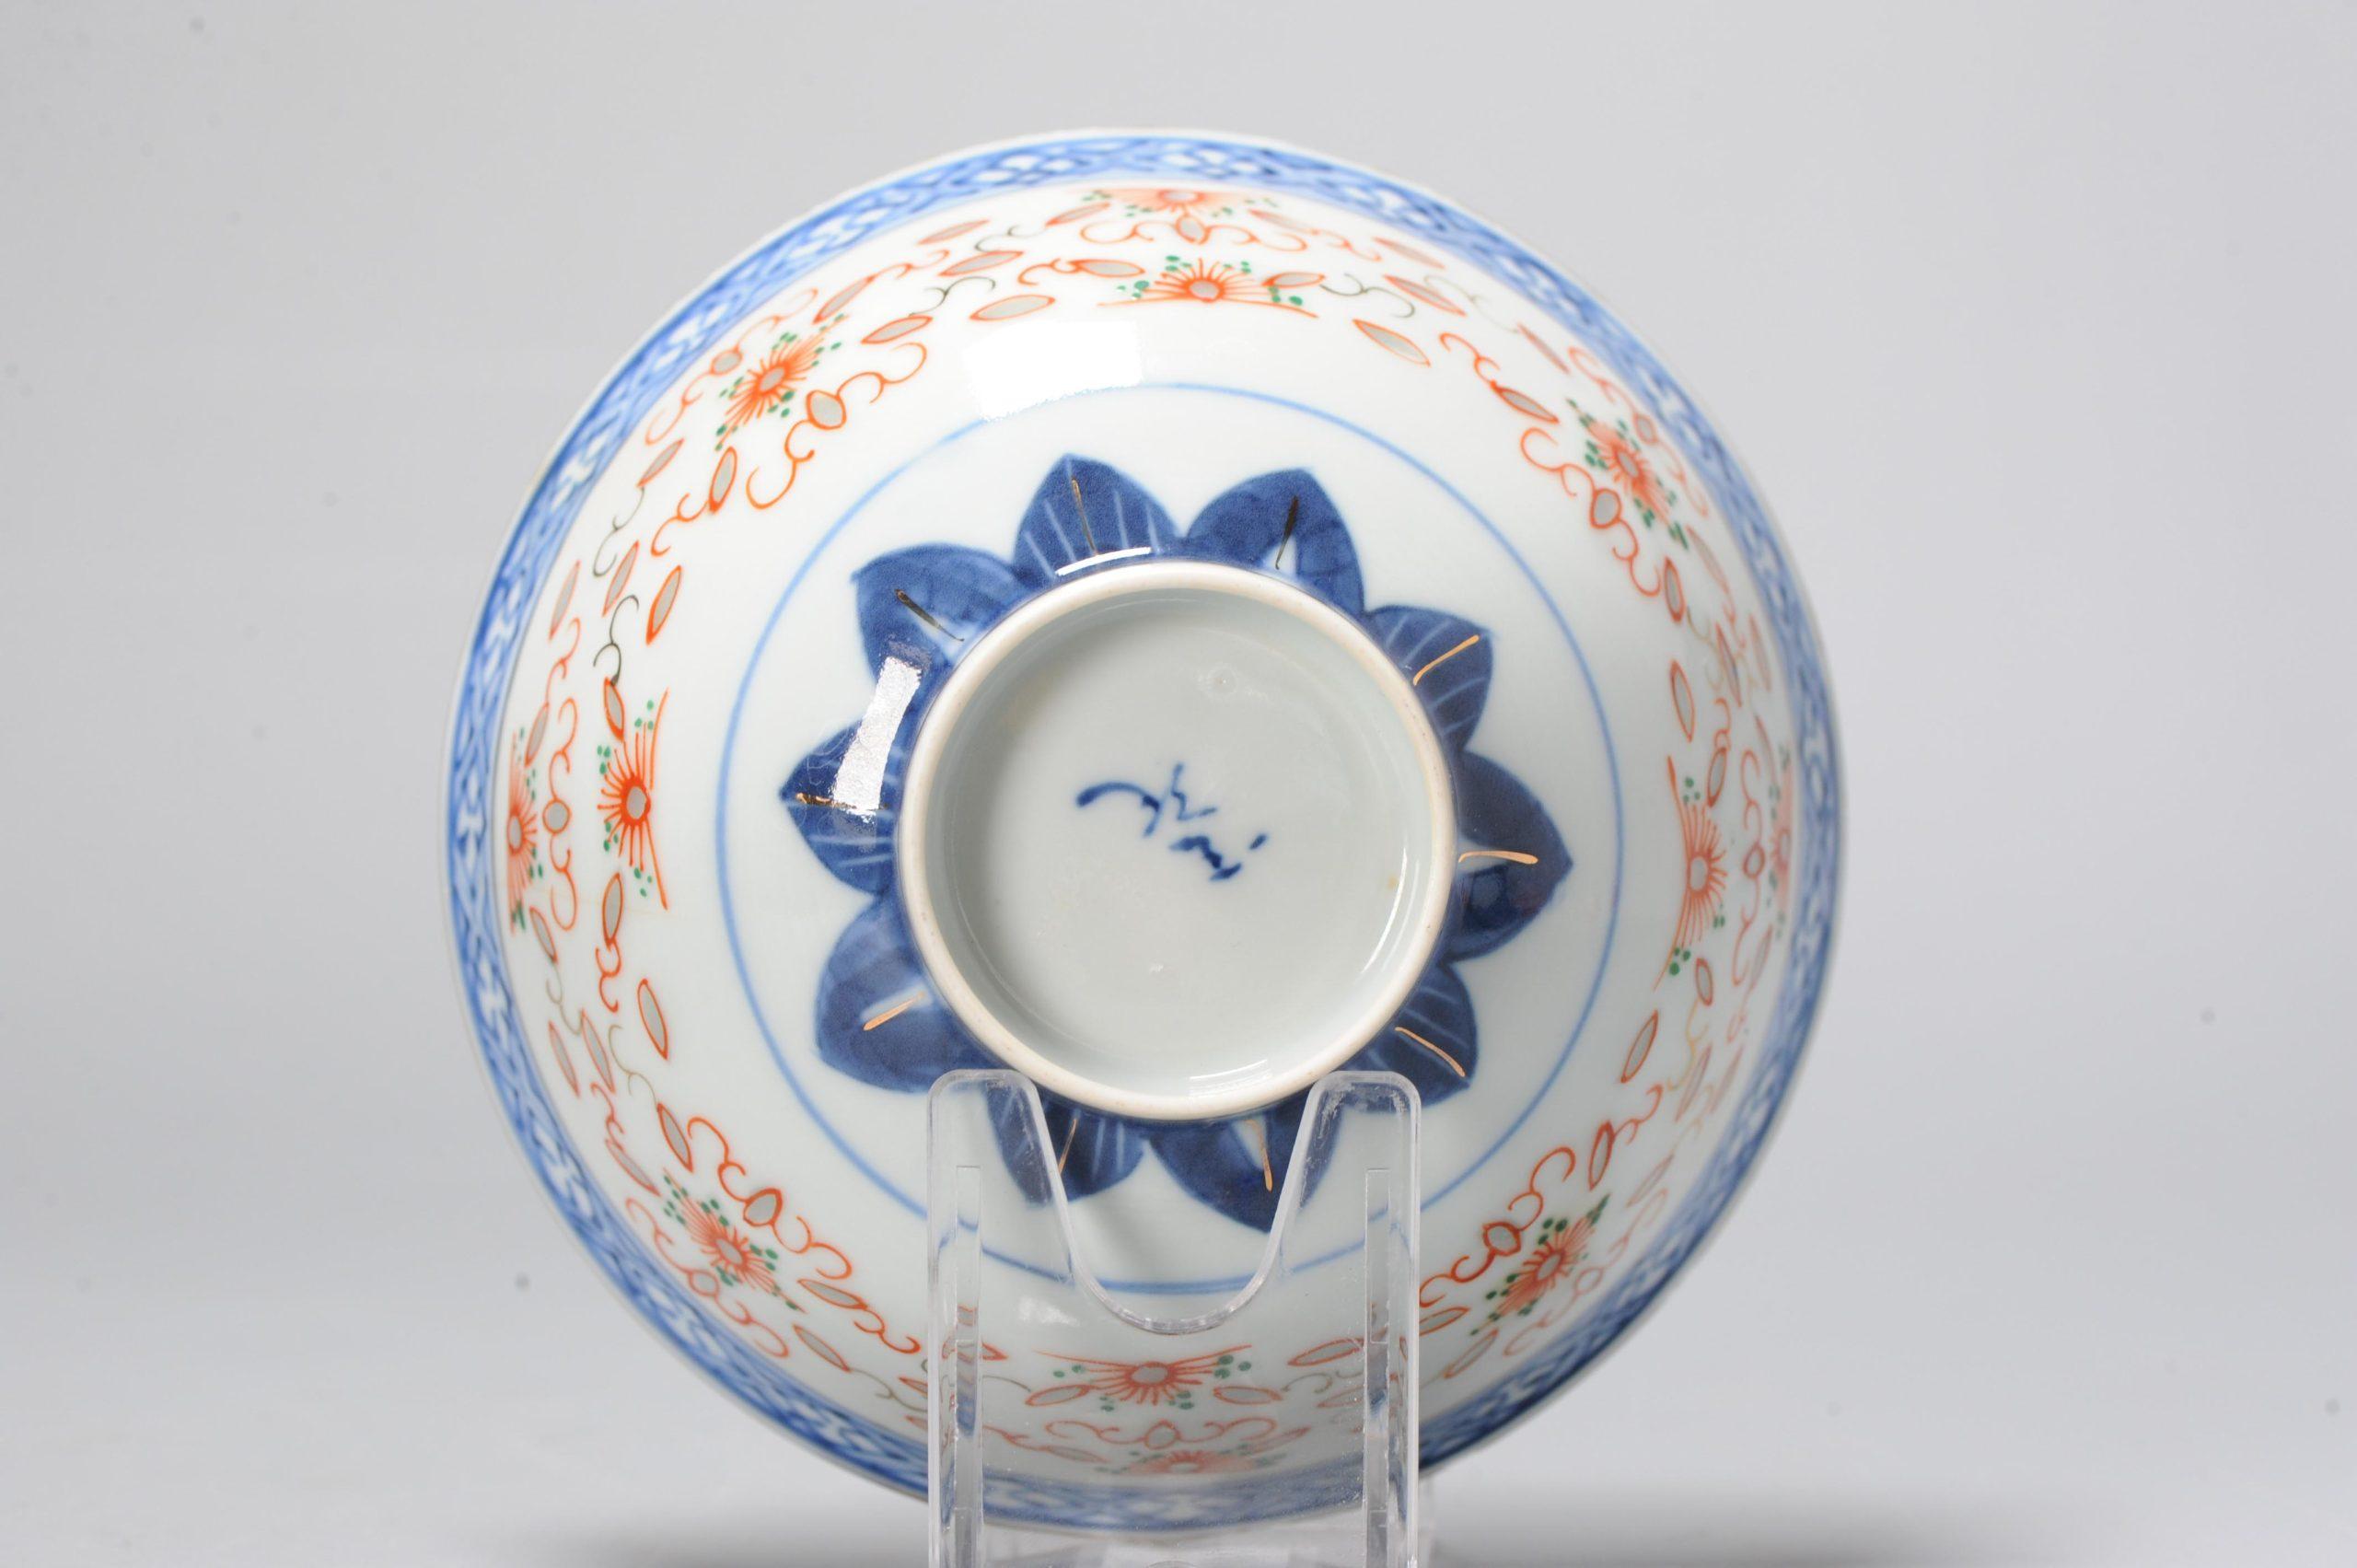 Porcelain Antique Chinese Republic Period Rice Grain Bowl with Flowers, China 20th Century For Sale